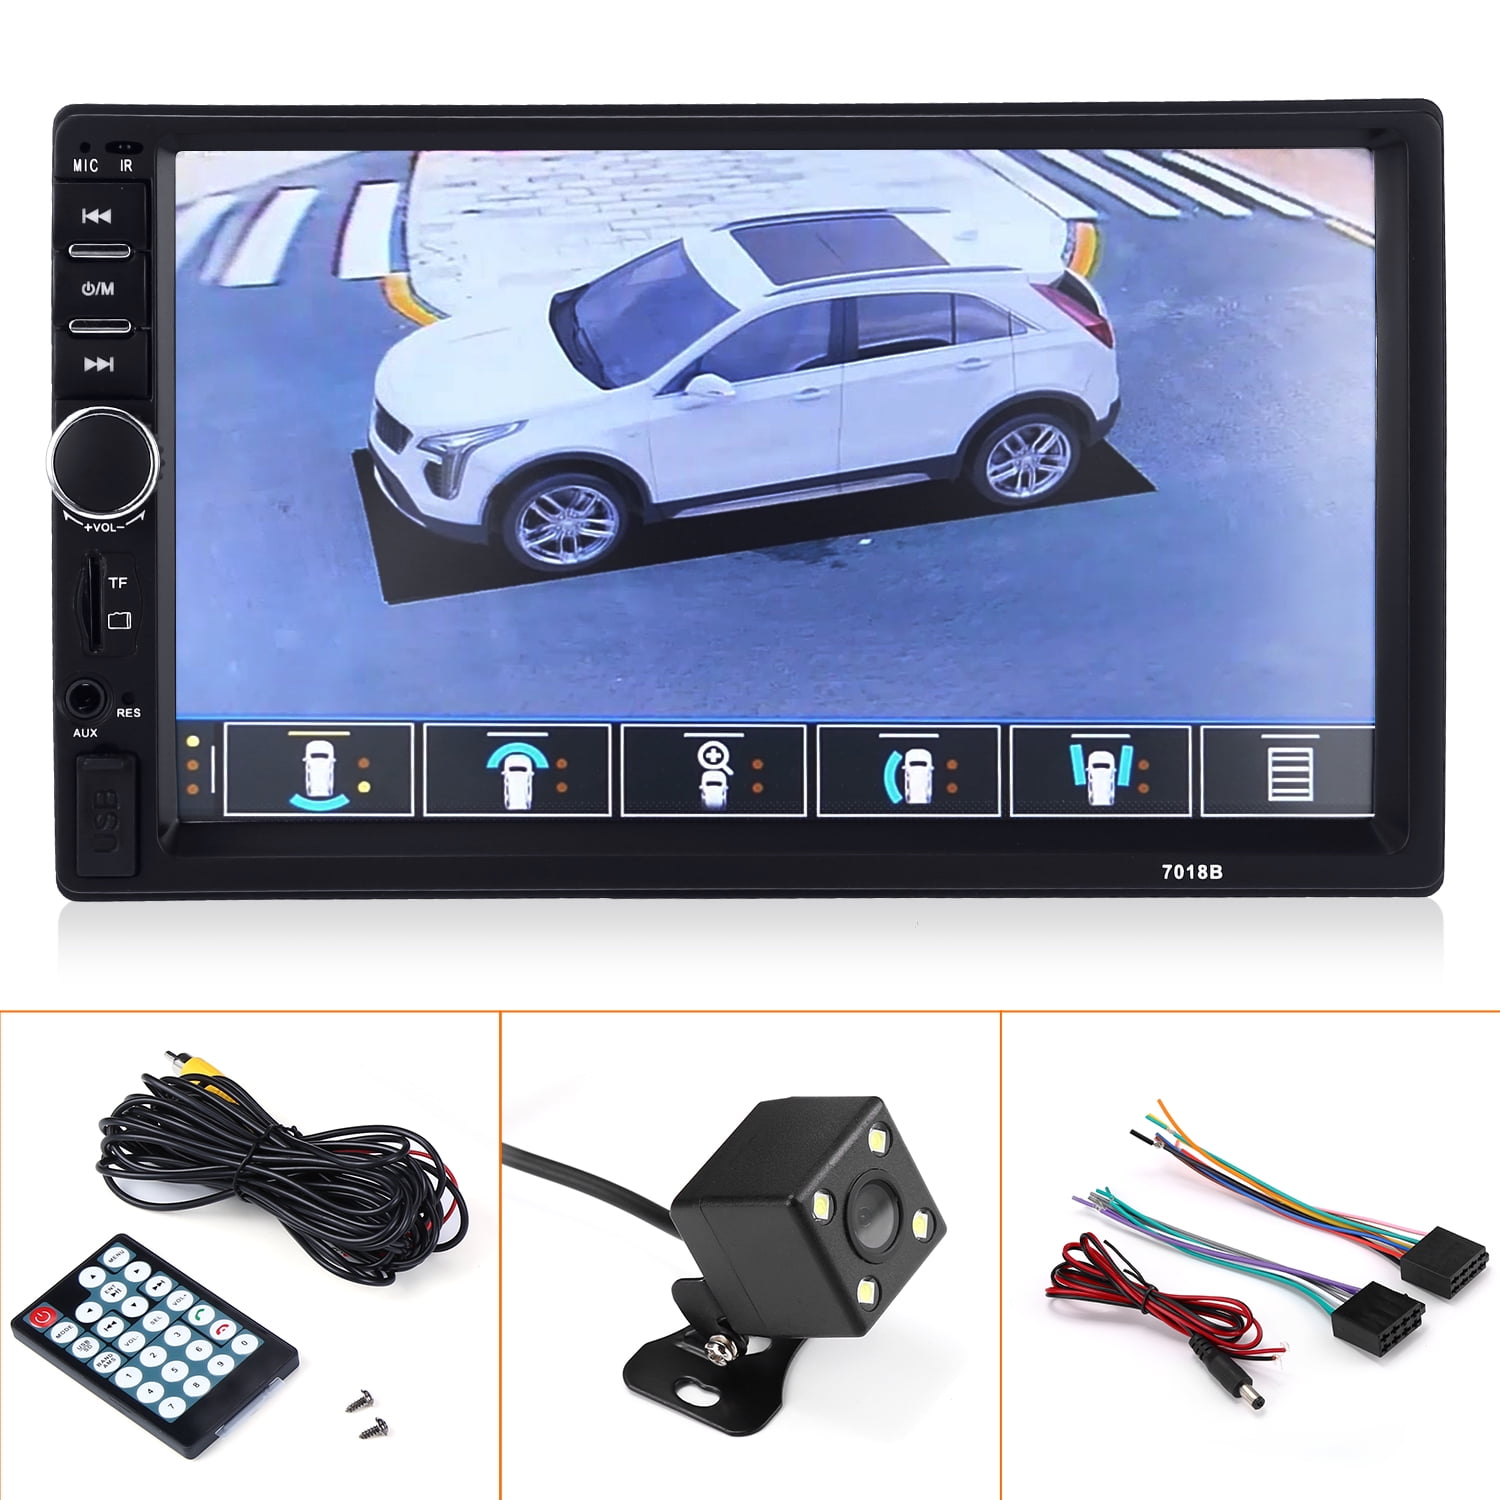 Rear Camera Android iPhone Mirrolink Car Stereo Bluetooth 2DIN 7" HD MP5 Player 